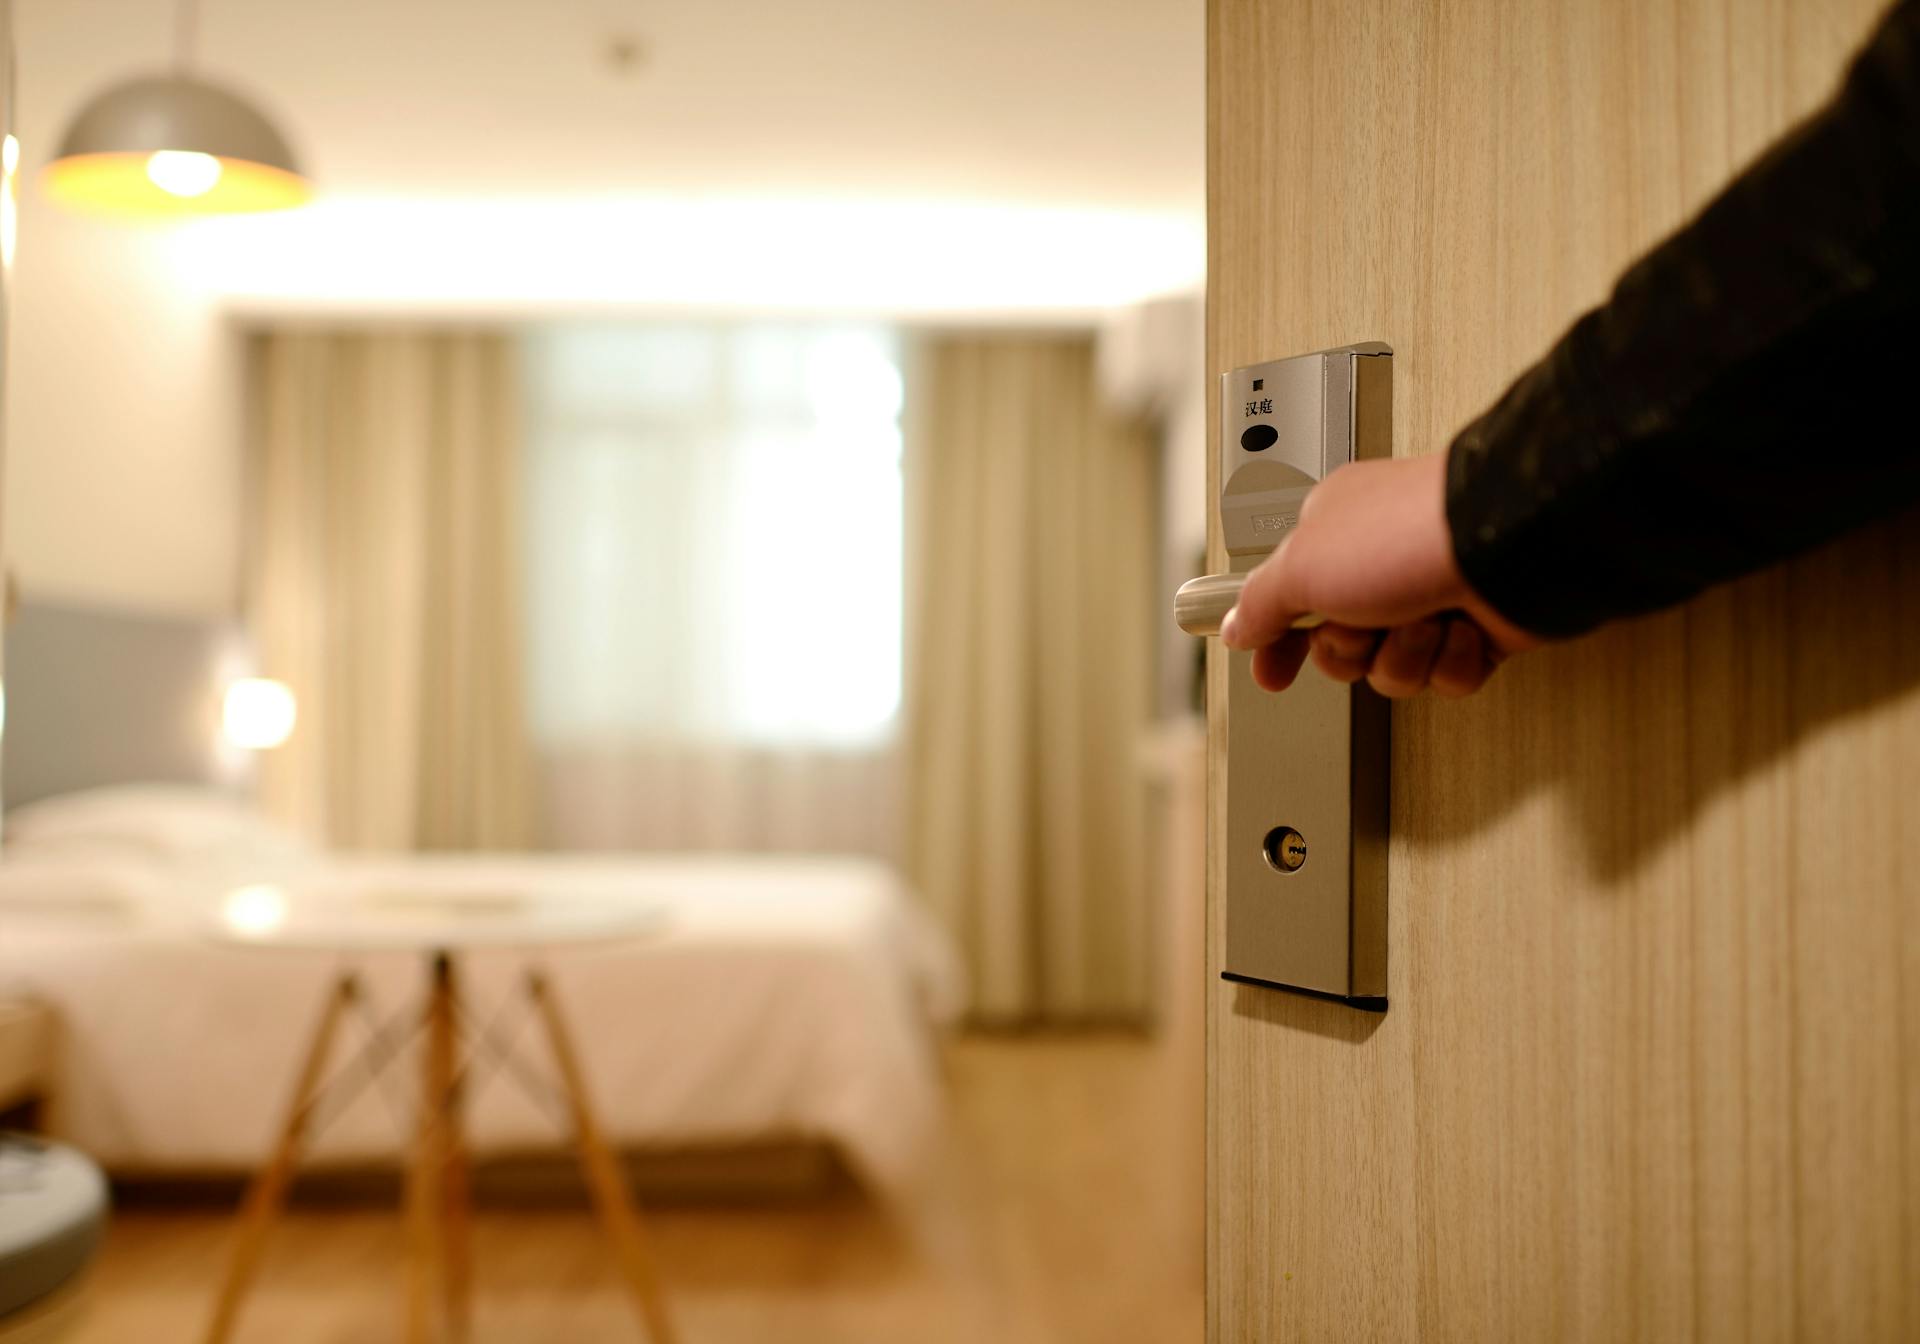 A hotel room being opened with the door and lock visible.